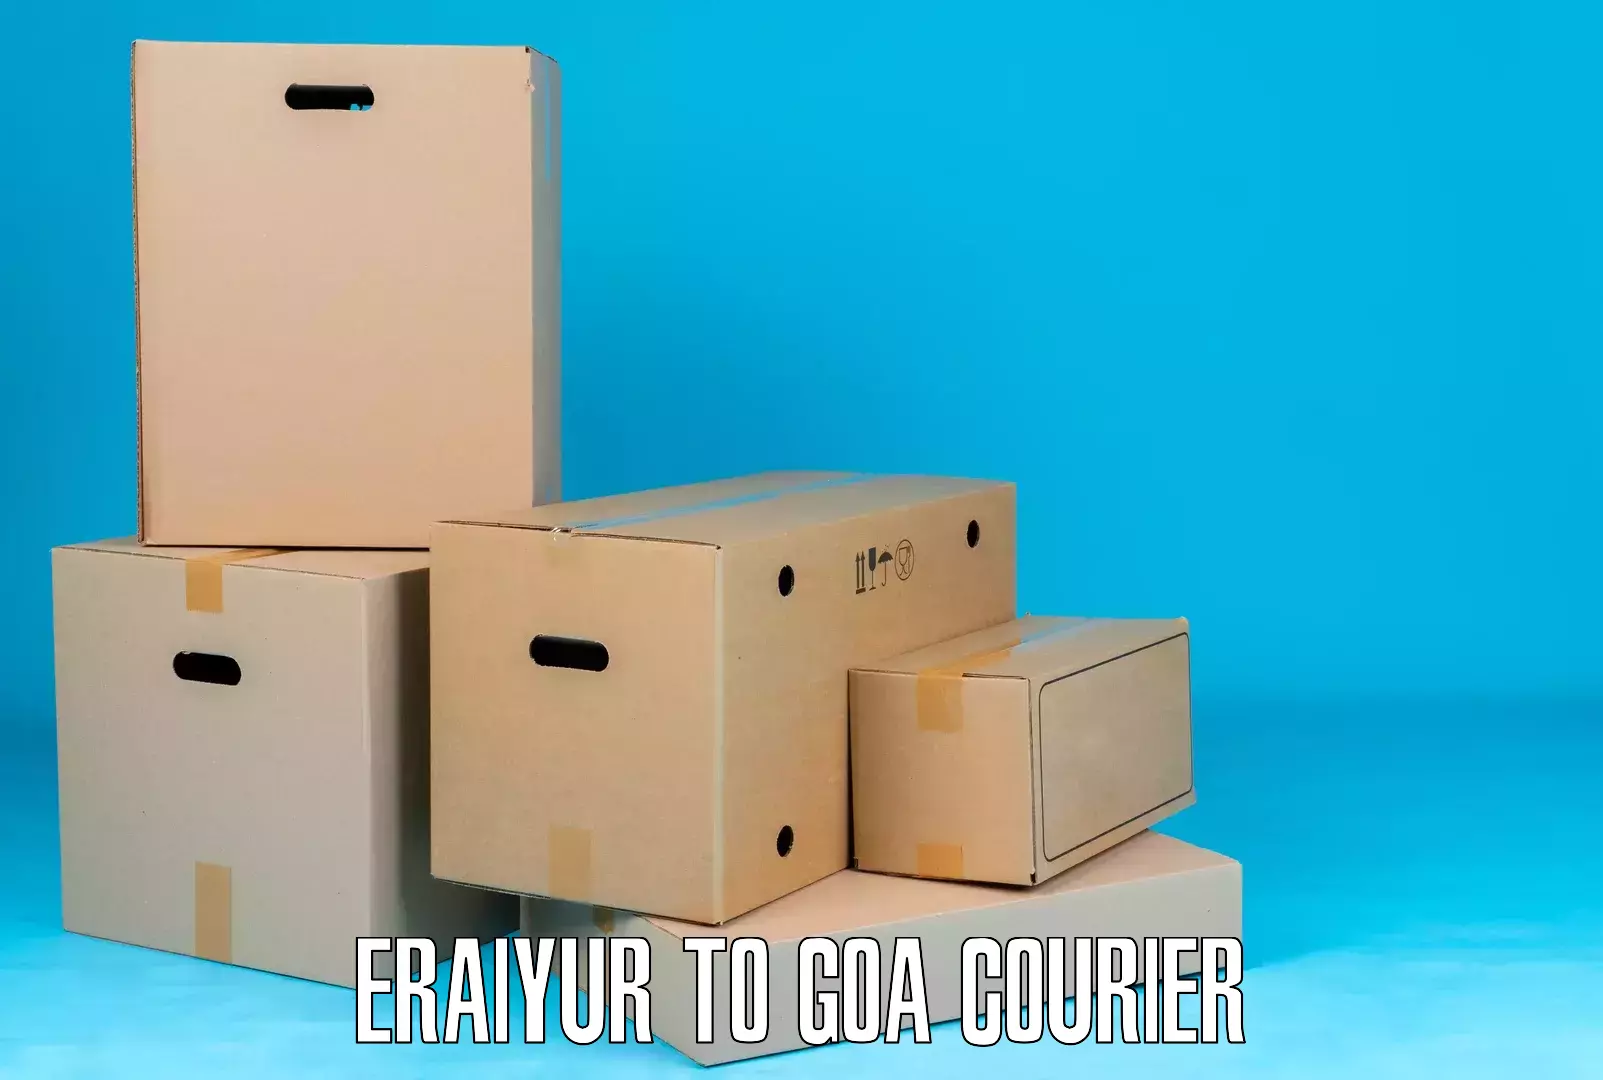 Courier service partnerships in Eraiyur to Goa